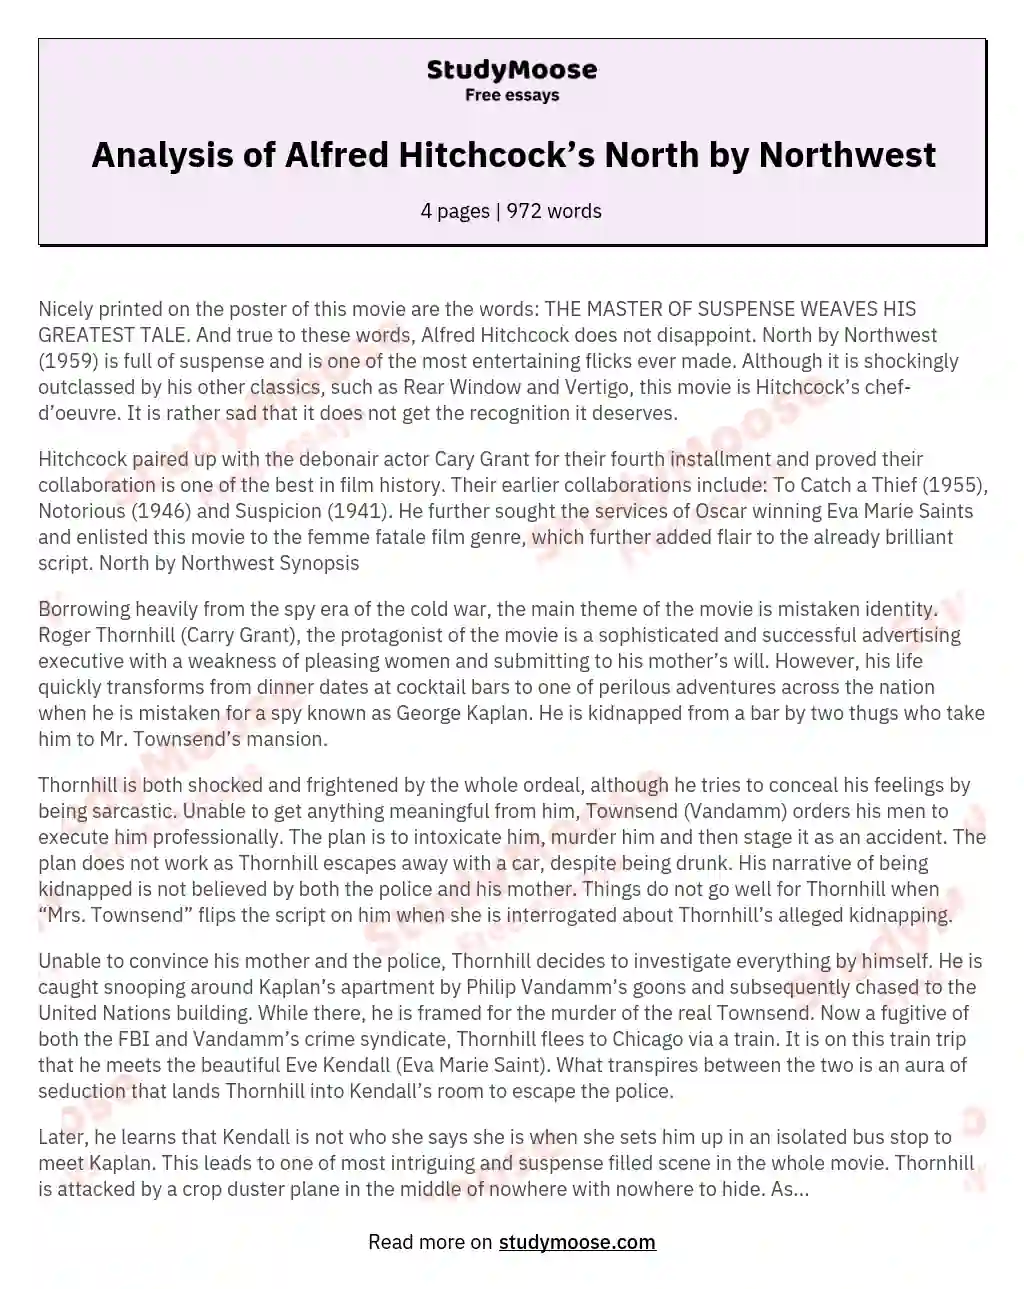 Analysis of Alfred Hitchcock’s North by Northwest